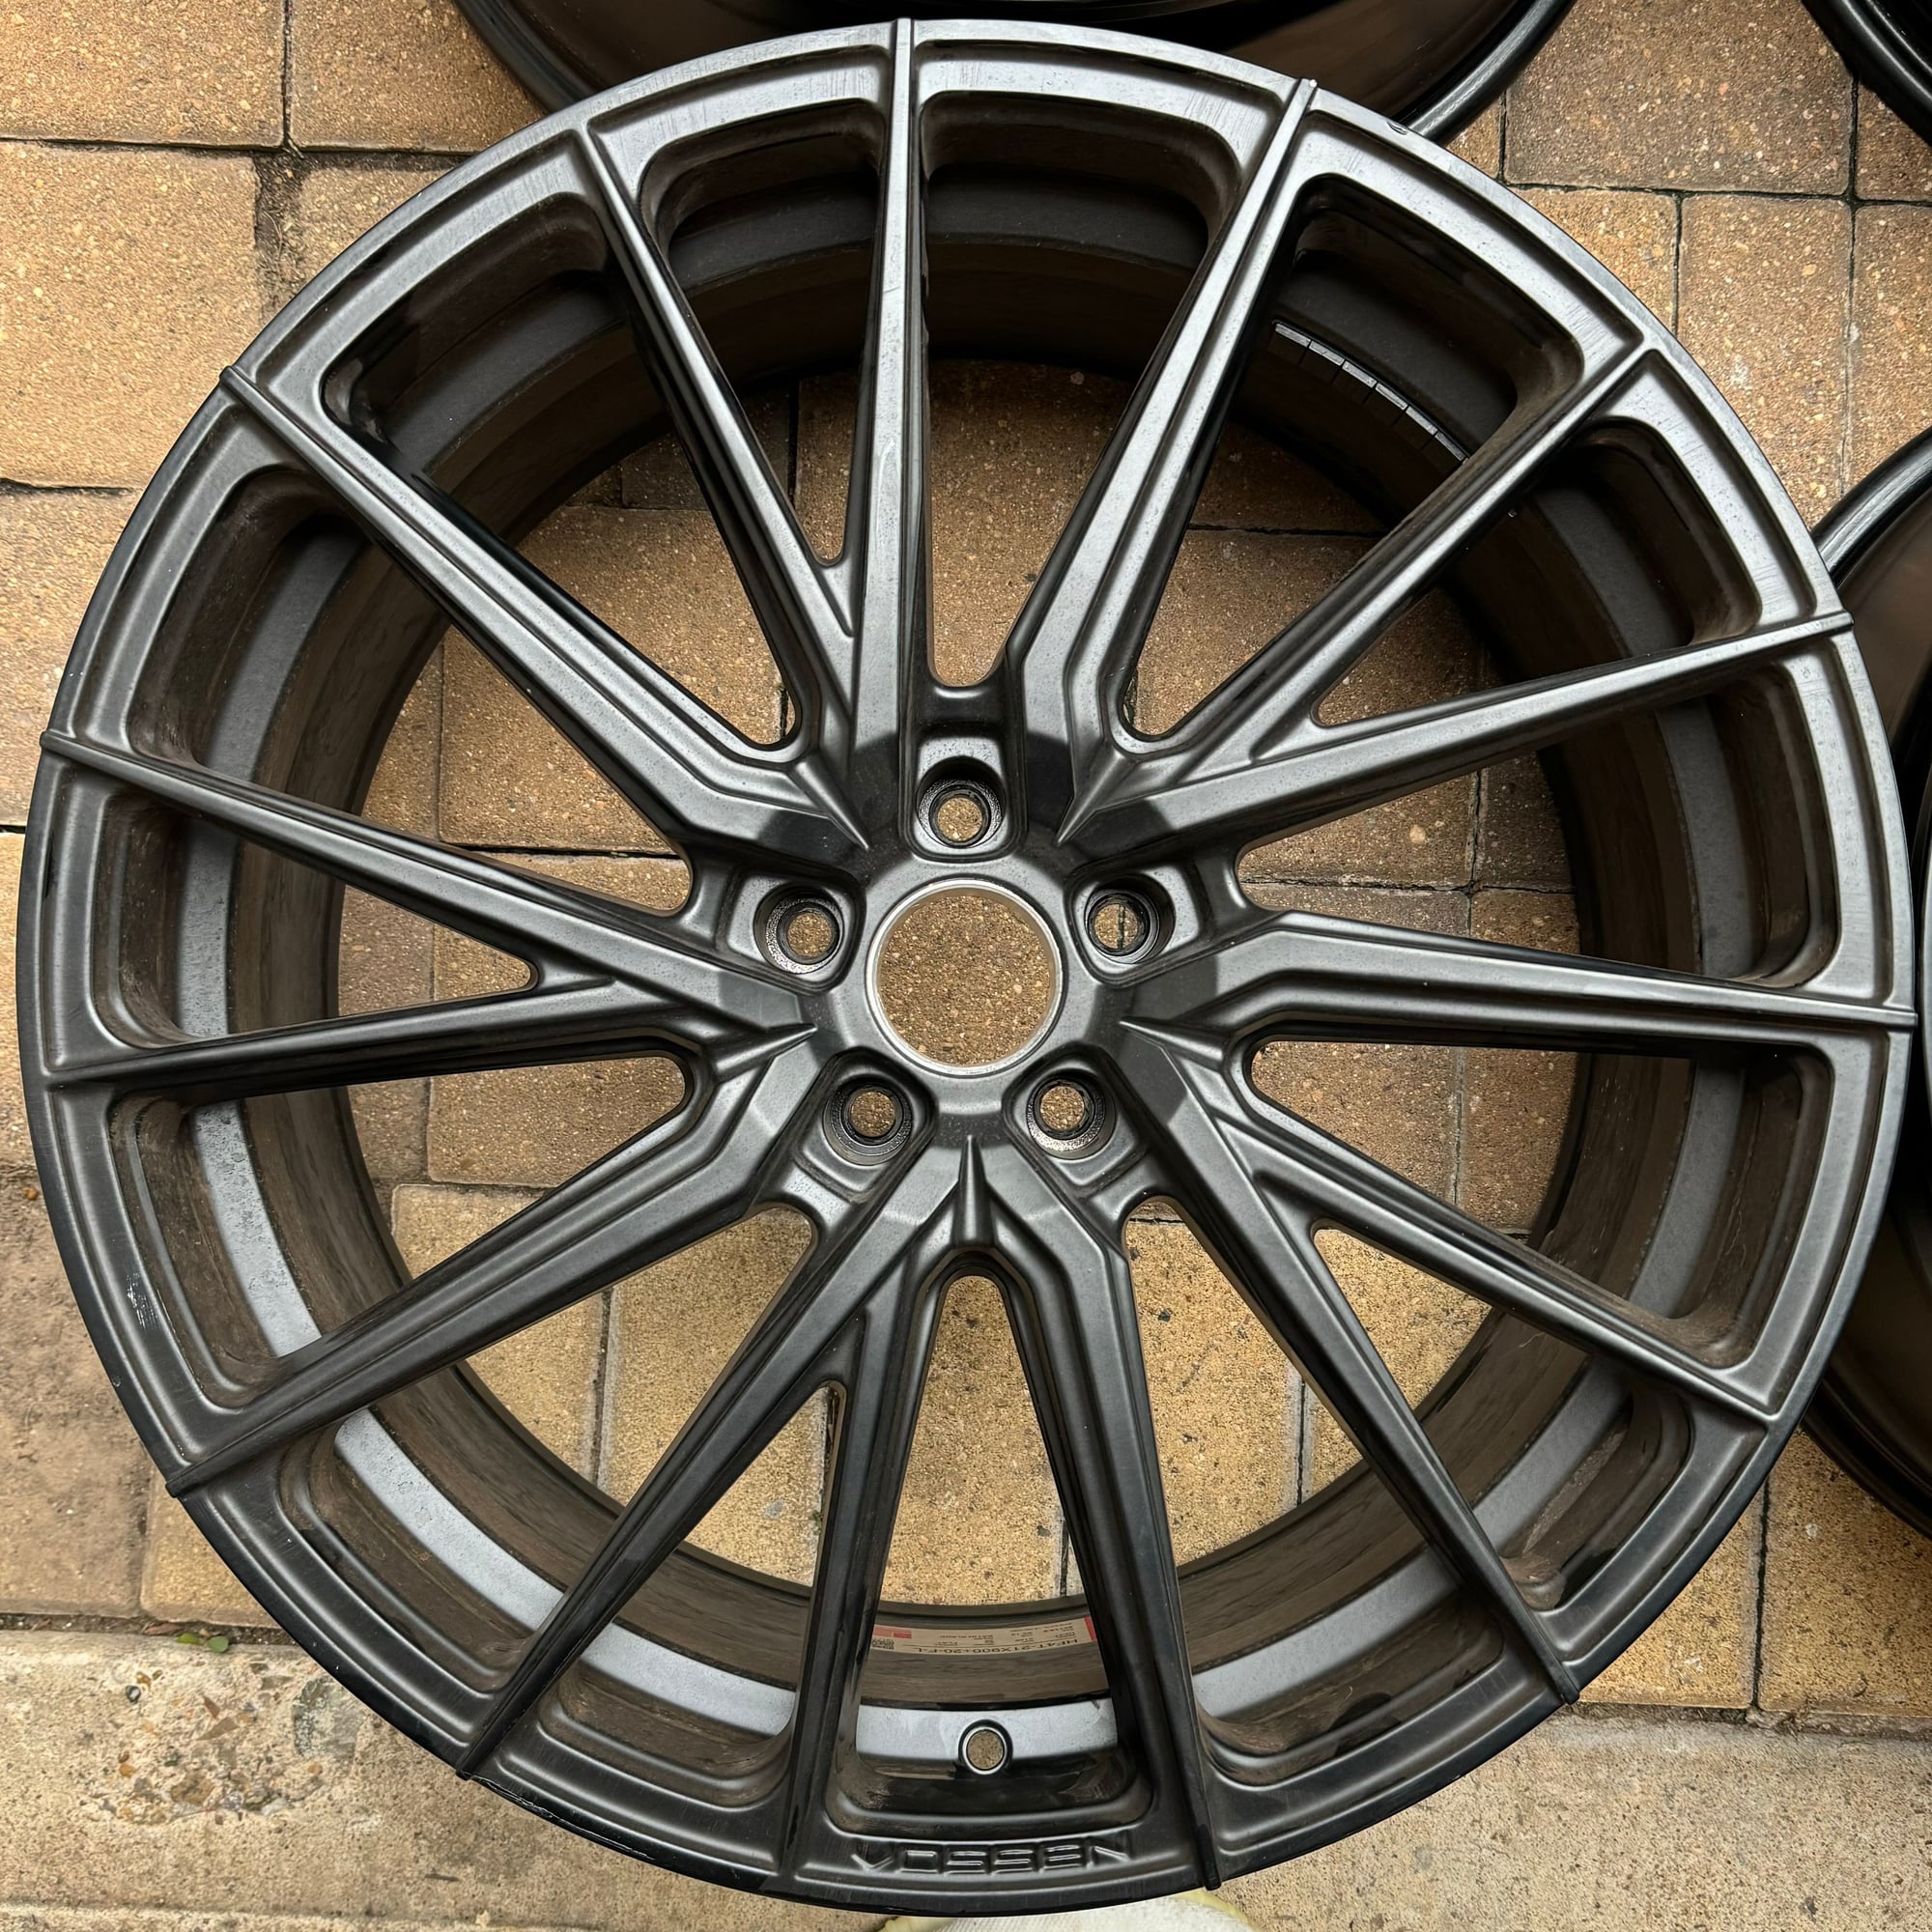 Wheels and Tires/Axles - Vossen Hybrid Forged HF-4T 21x9 +25 - Used - Metro Houston, TX 77498, United States